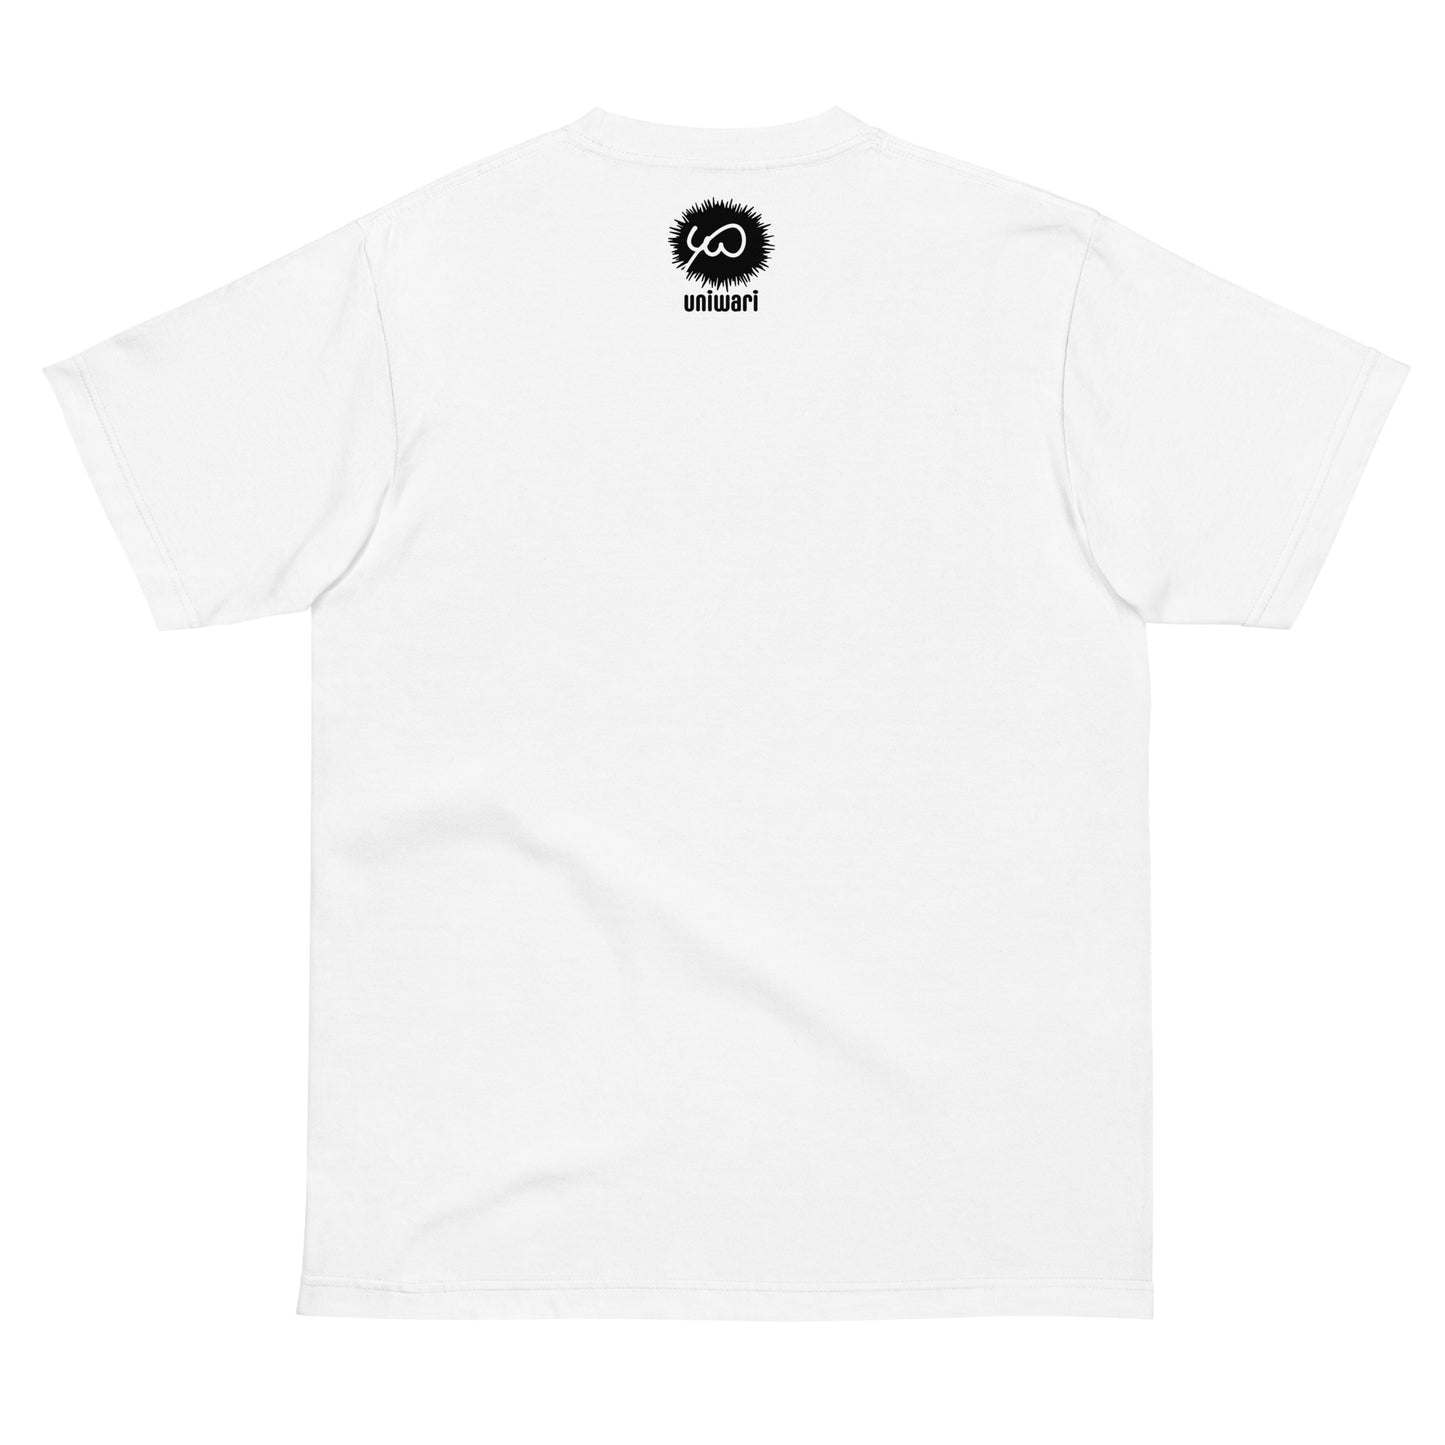 White High Quality Tee - Front Design with an Black Uniwari Logo - Back Design with Weekdays in Japanese and Blue back ground